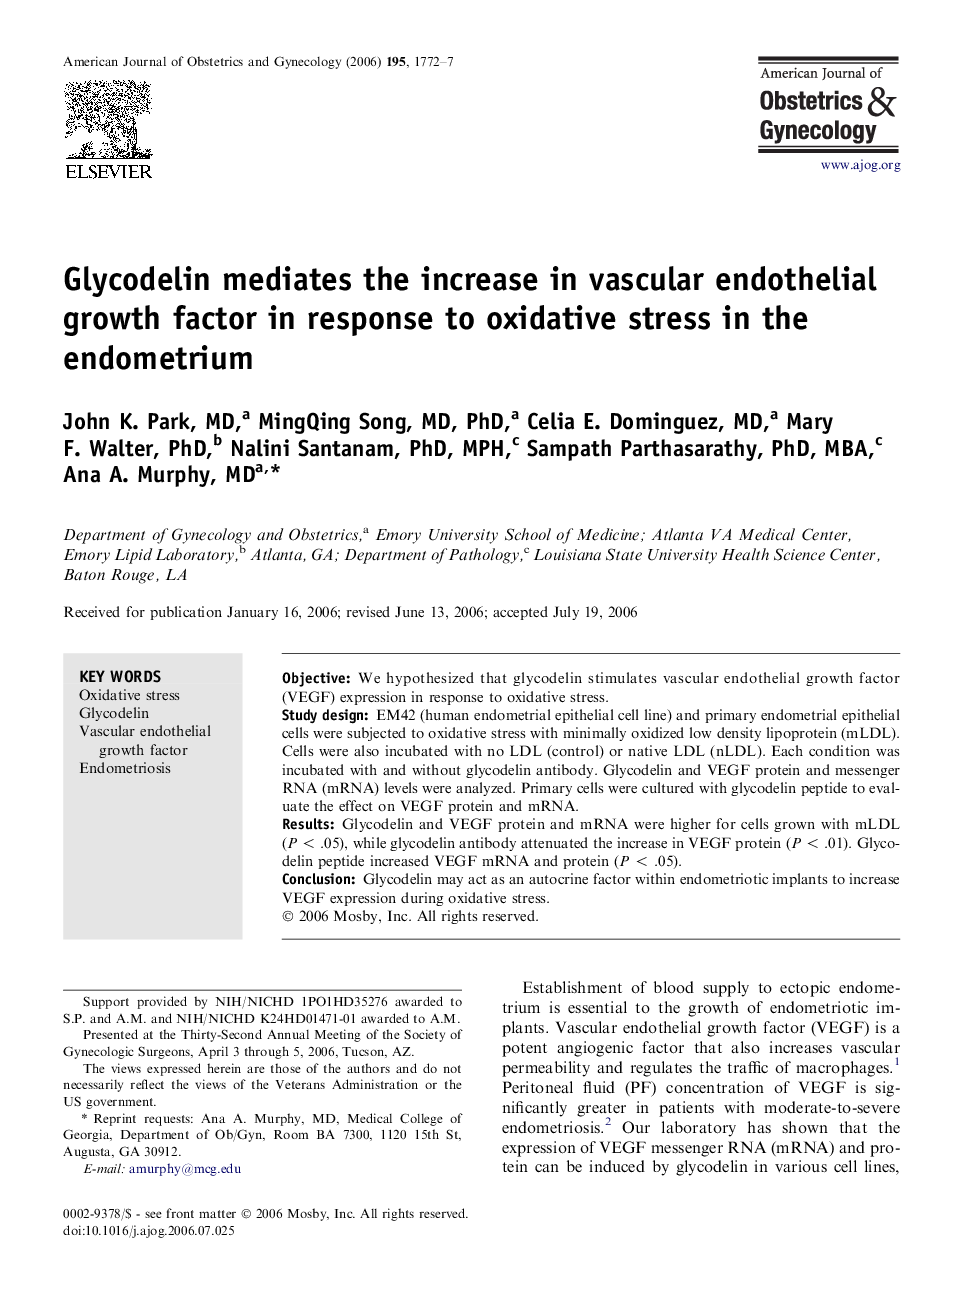 Glycodelin mediates the increase in vascular endothelial growth factor in response to oxidative stress in the endometrium 